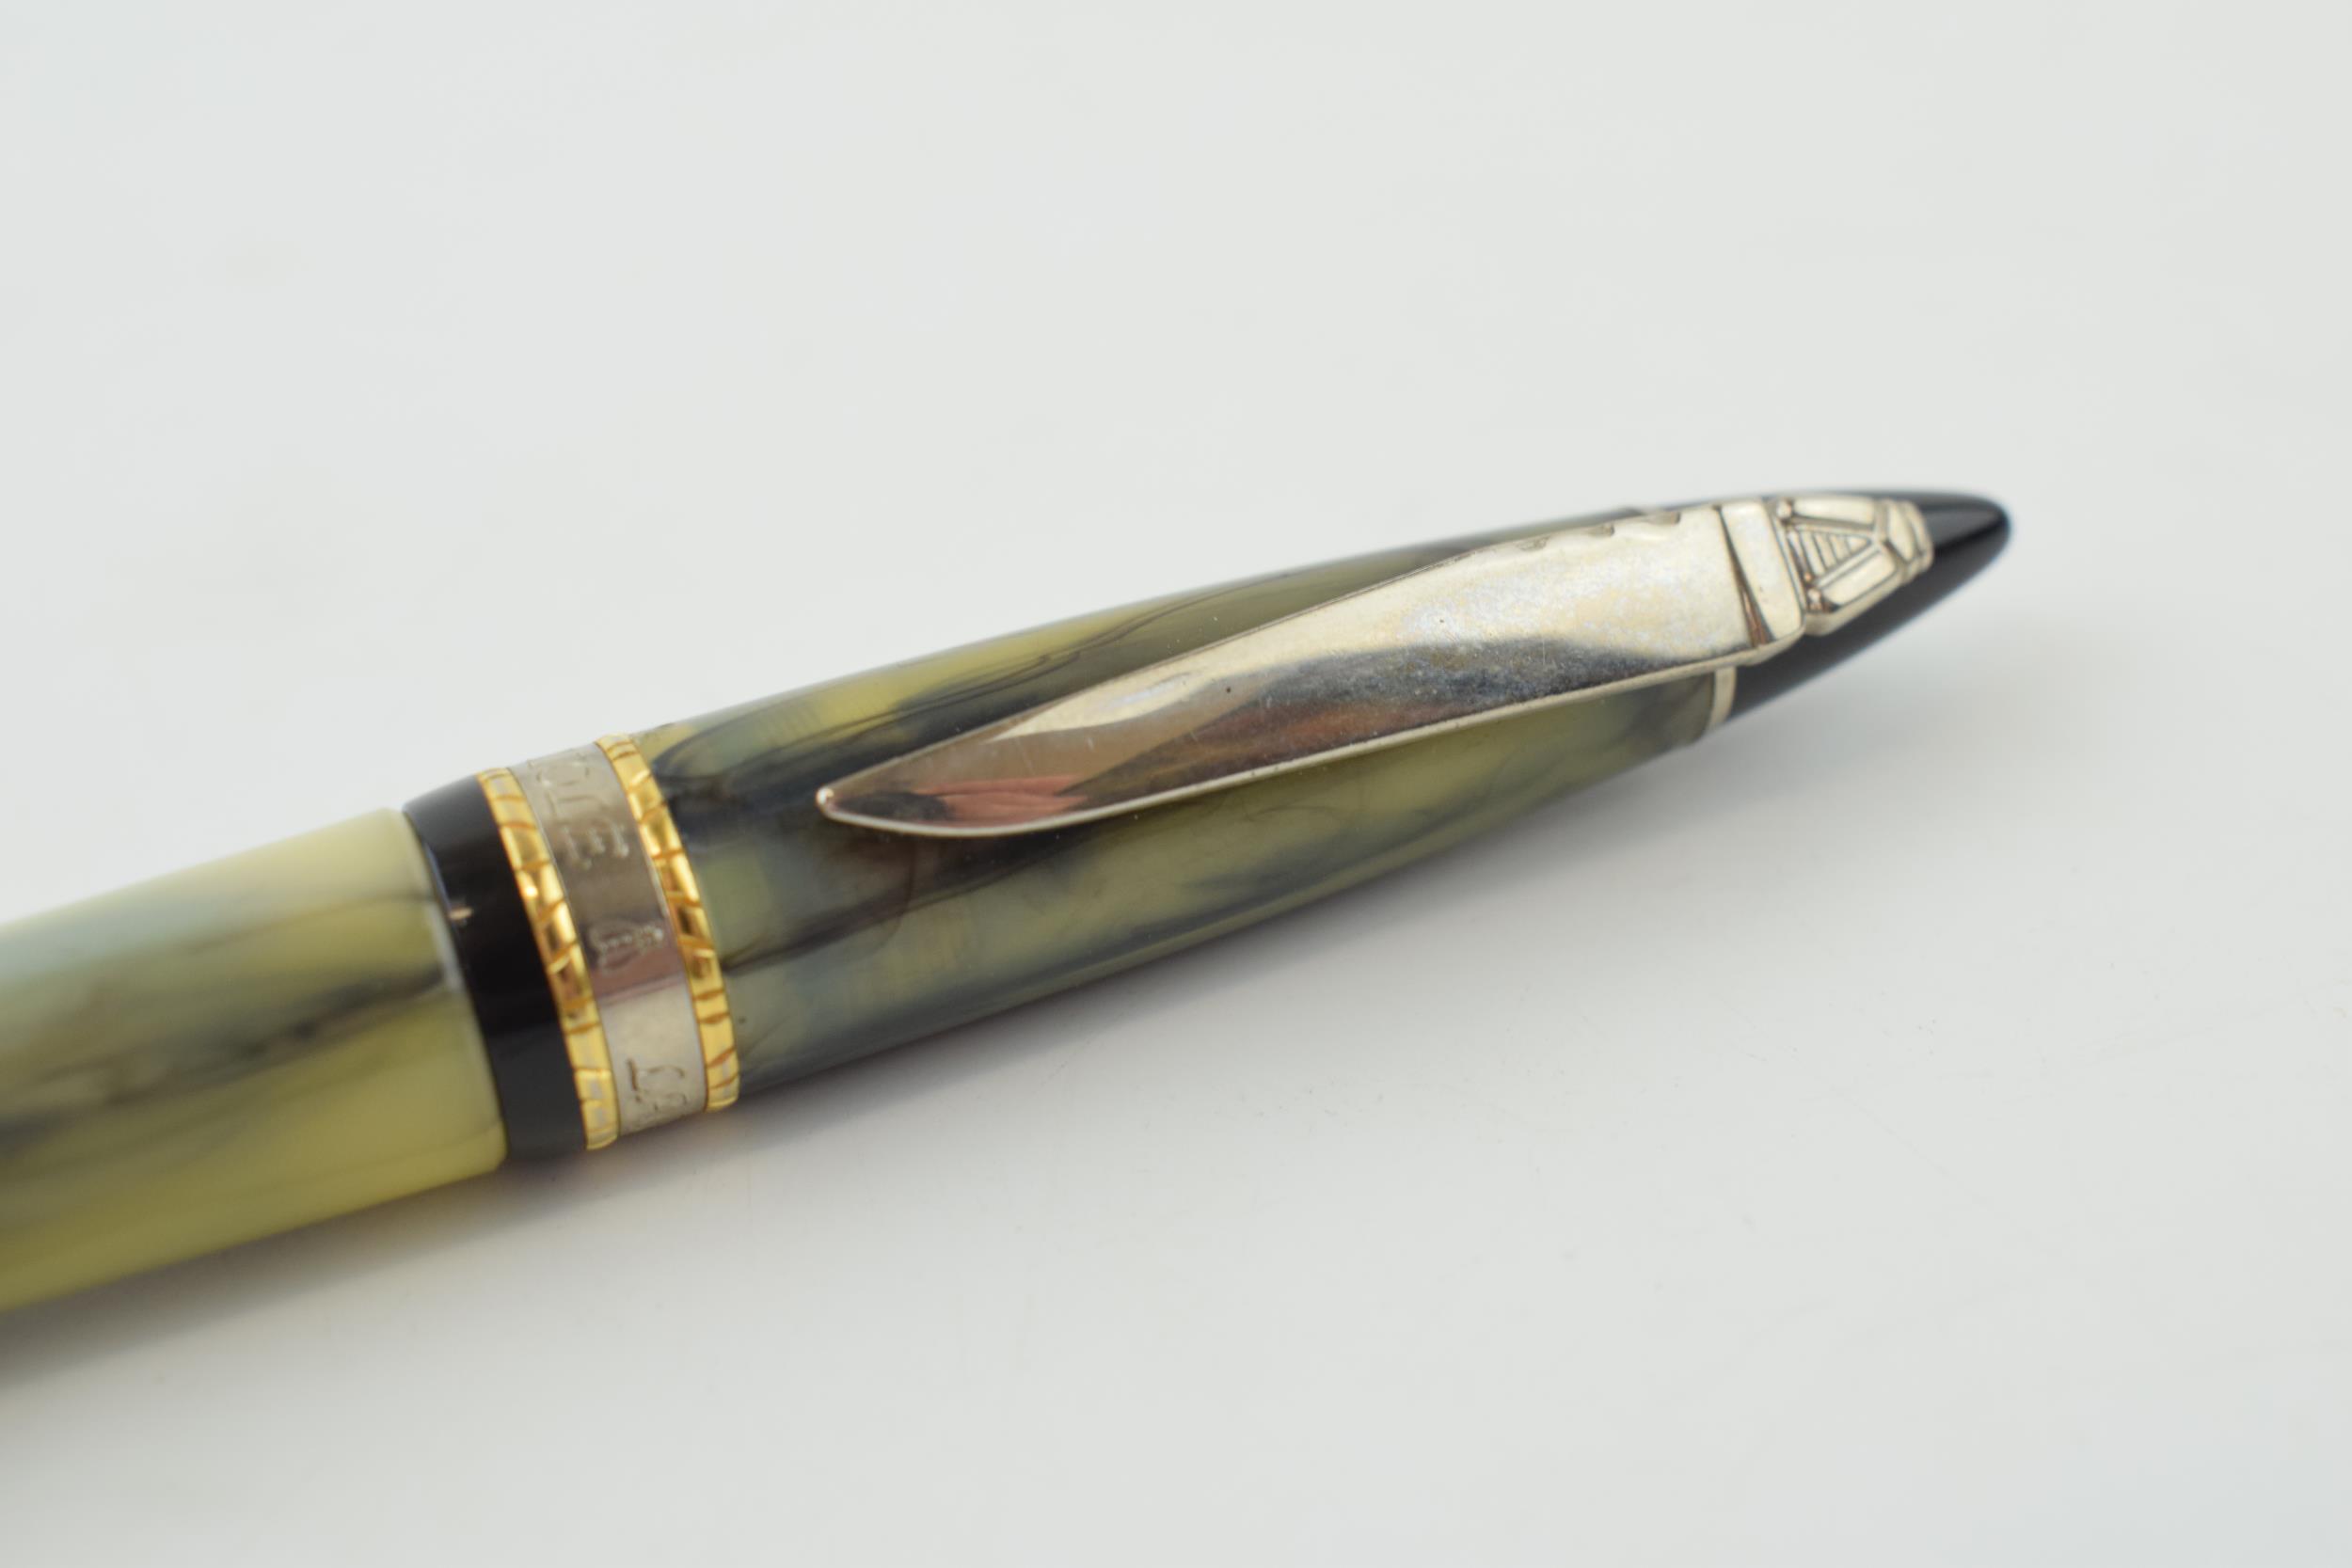 Vintage French fountain pen by Laguile Ecriture, marbled plastic in an Art Deco design with bee - Image 2 of 3